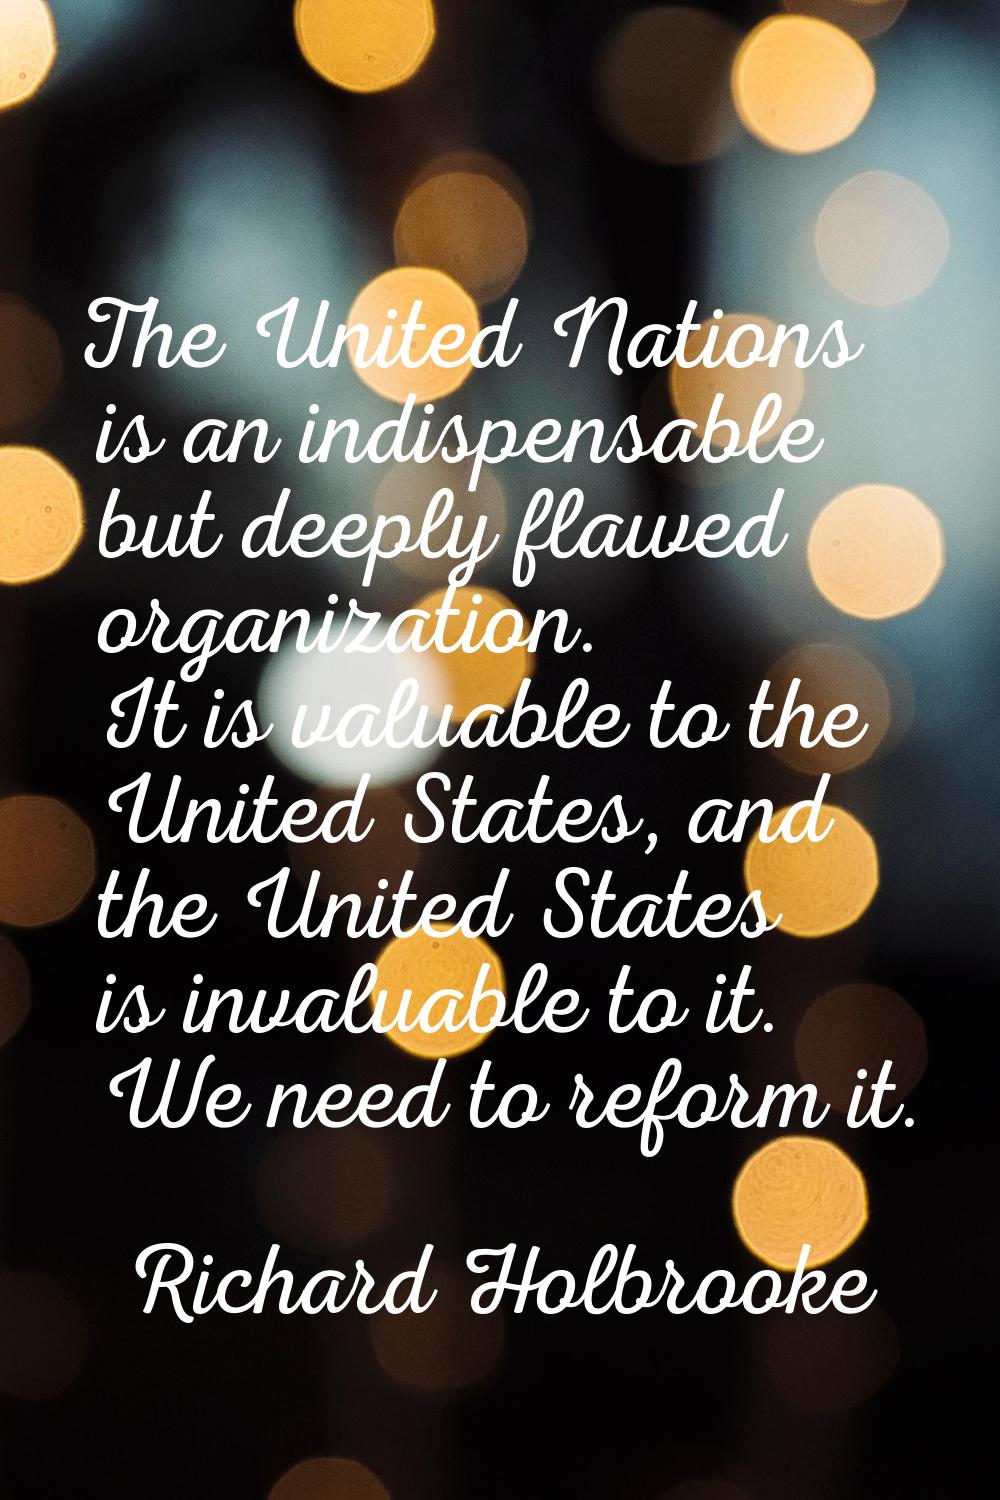 The United Nations is an indispensable but deeply flawed organization. It is valuable to the United